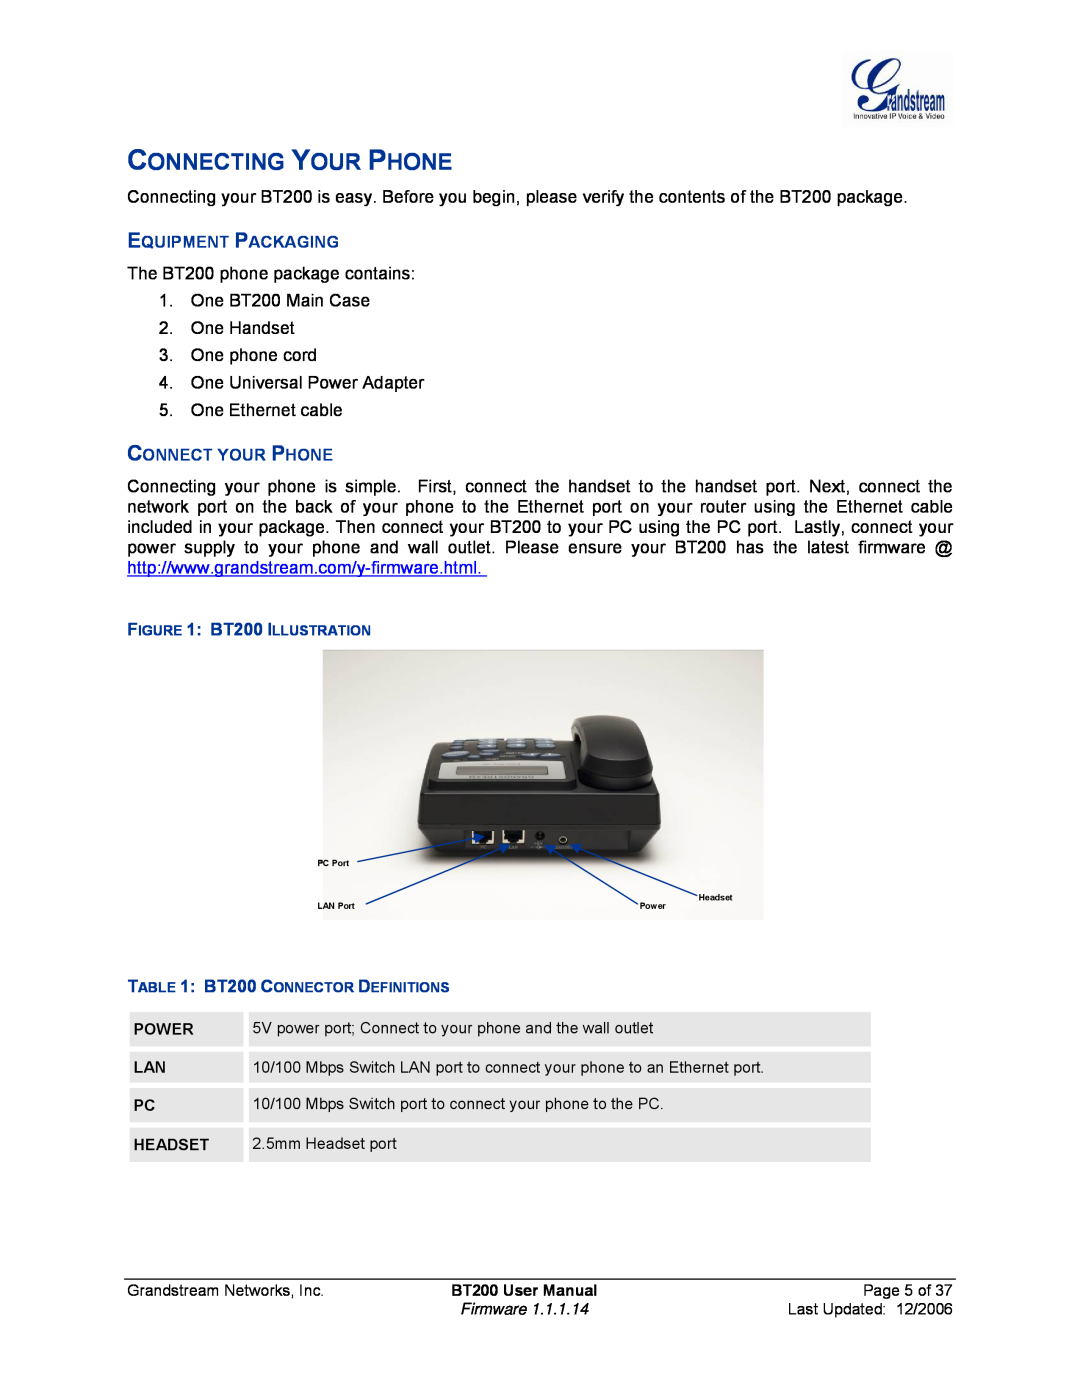 Grandstream Networks BT200 user manual Connecting Your Phone, Equipment Packaging, Connect Your Phone 